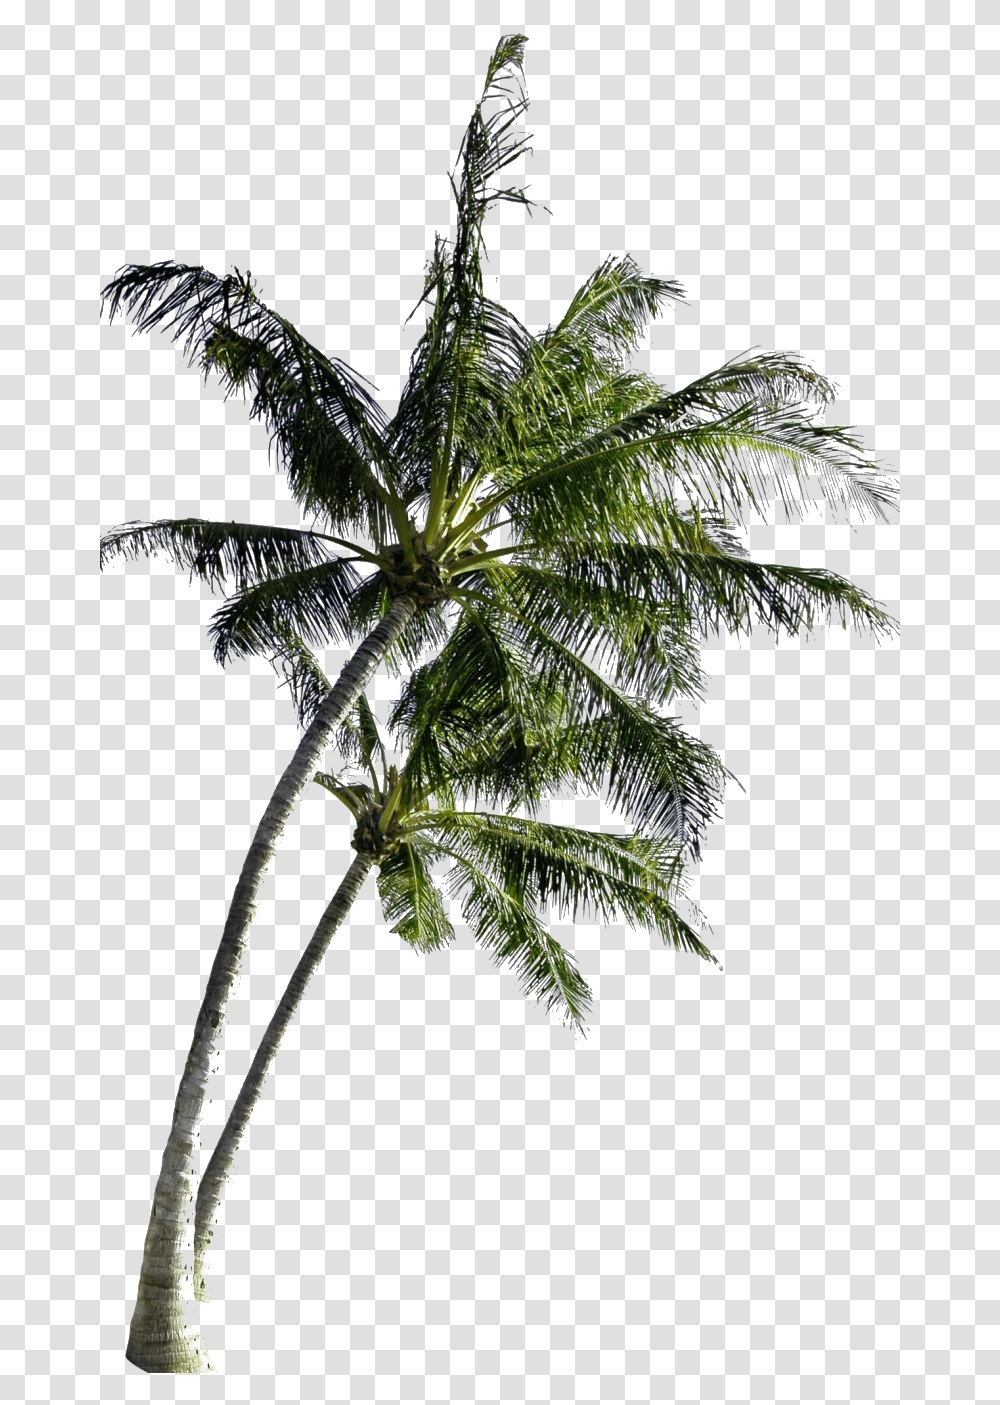 Coconut Tree Free Image All Coconut Tree With Coconut, Plant, Palm Tree, Arecaceae, Leaf Transparent Png